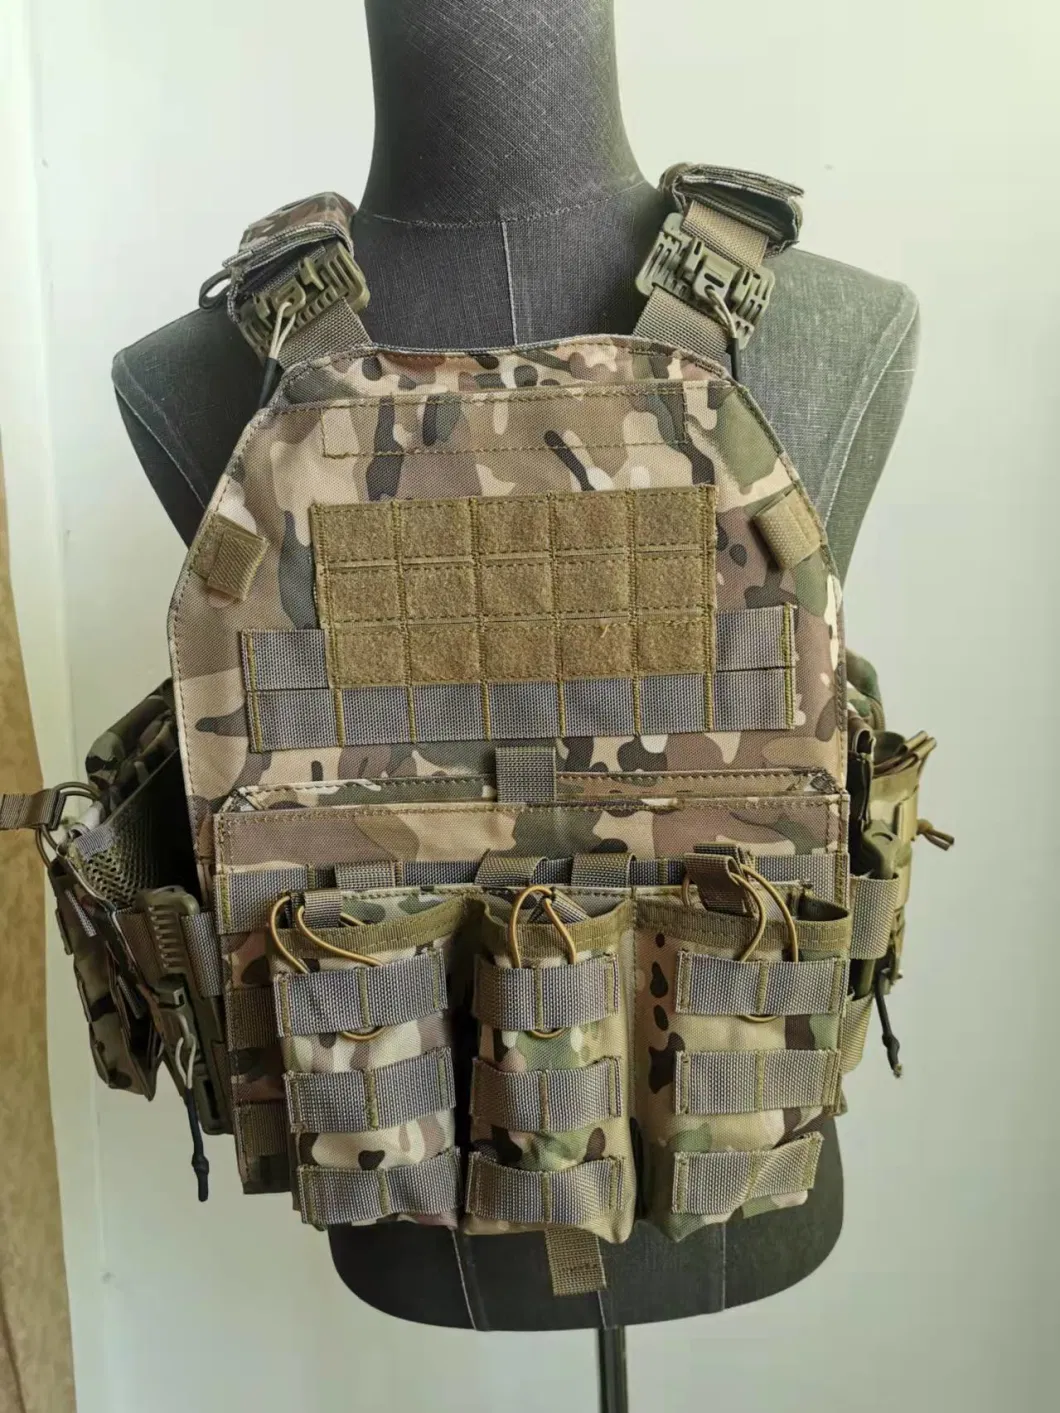 Military Swat Combat Hunting Shooting Quick Release Molle Training Tactical Vest